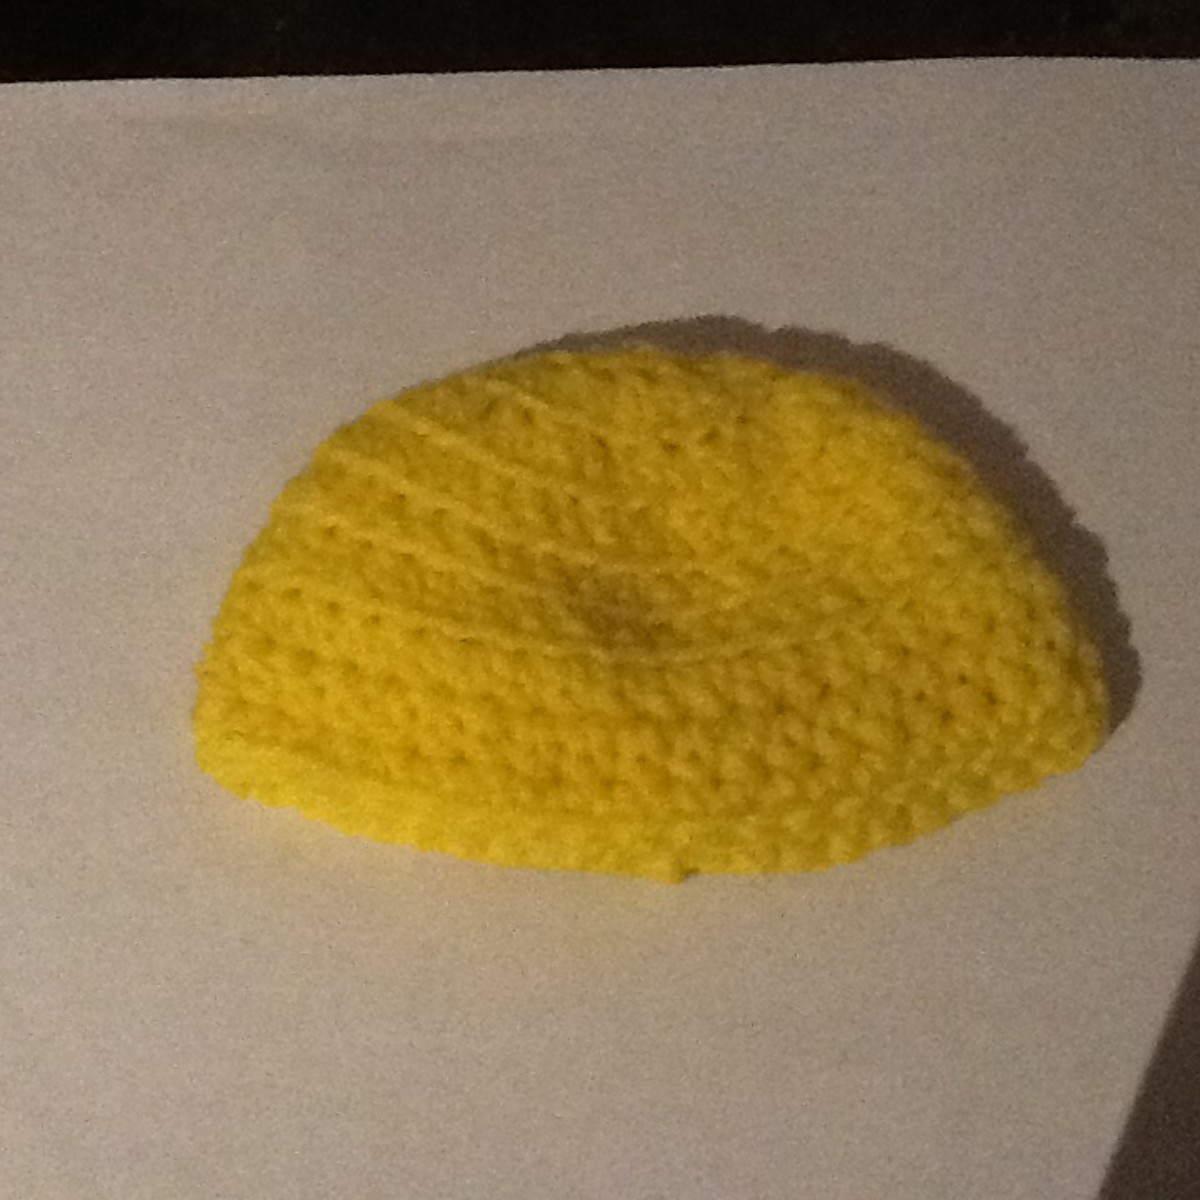 Do you have some leftover yarn that's too short for most projects? Turn it into a tiny hat for a preemie baby!